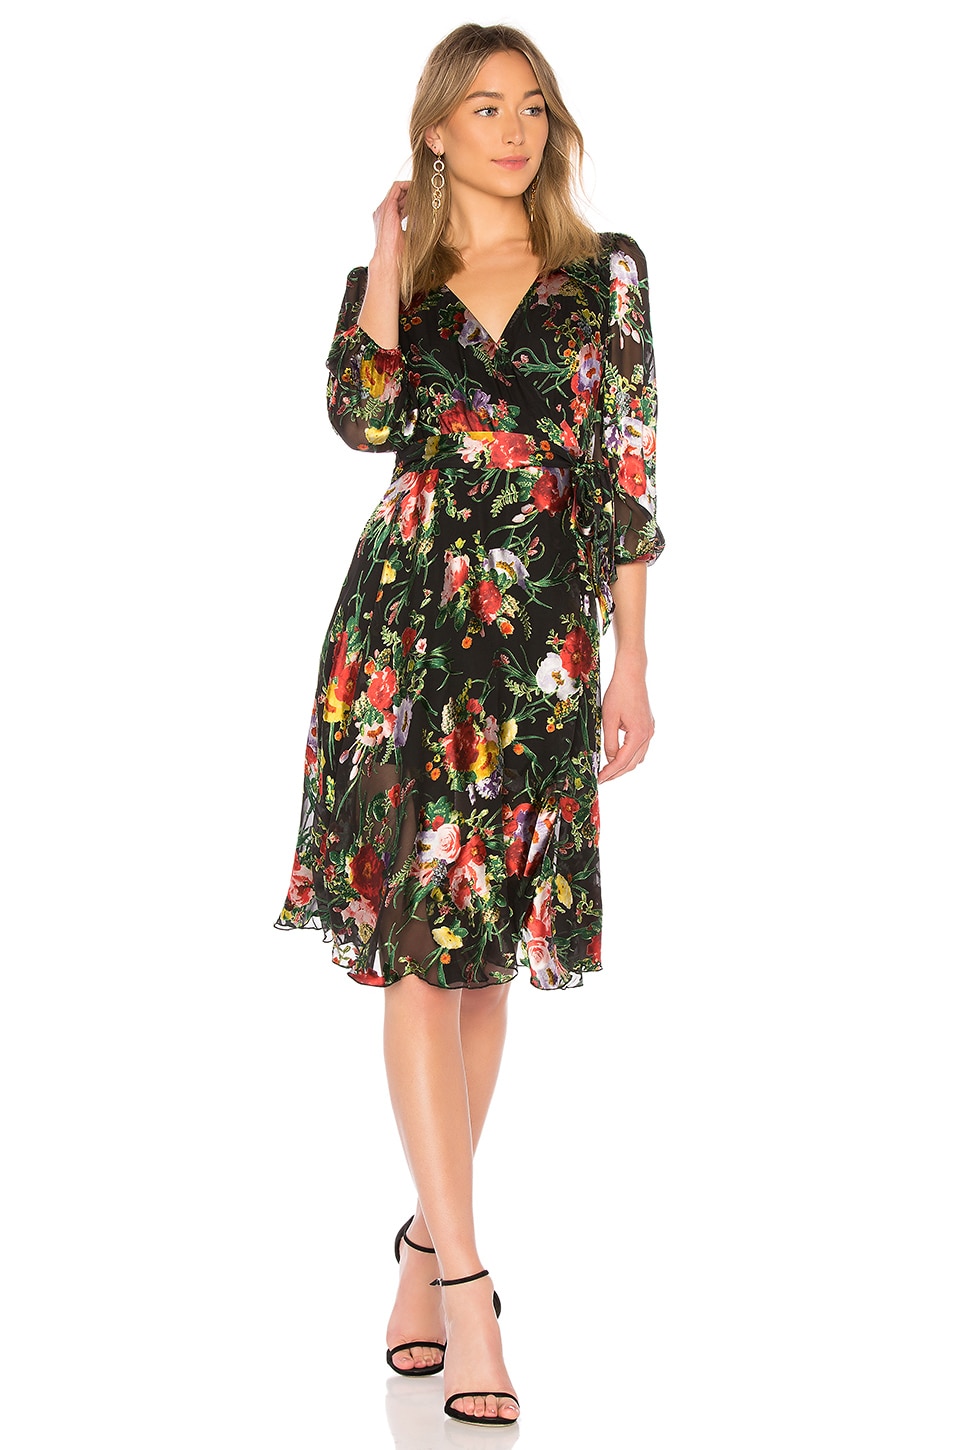 Alice + Olivia Abney Wrap Dress in Blooming Bouquet | REVOLVE